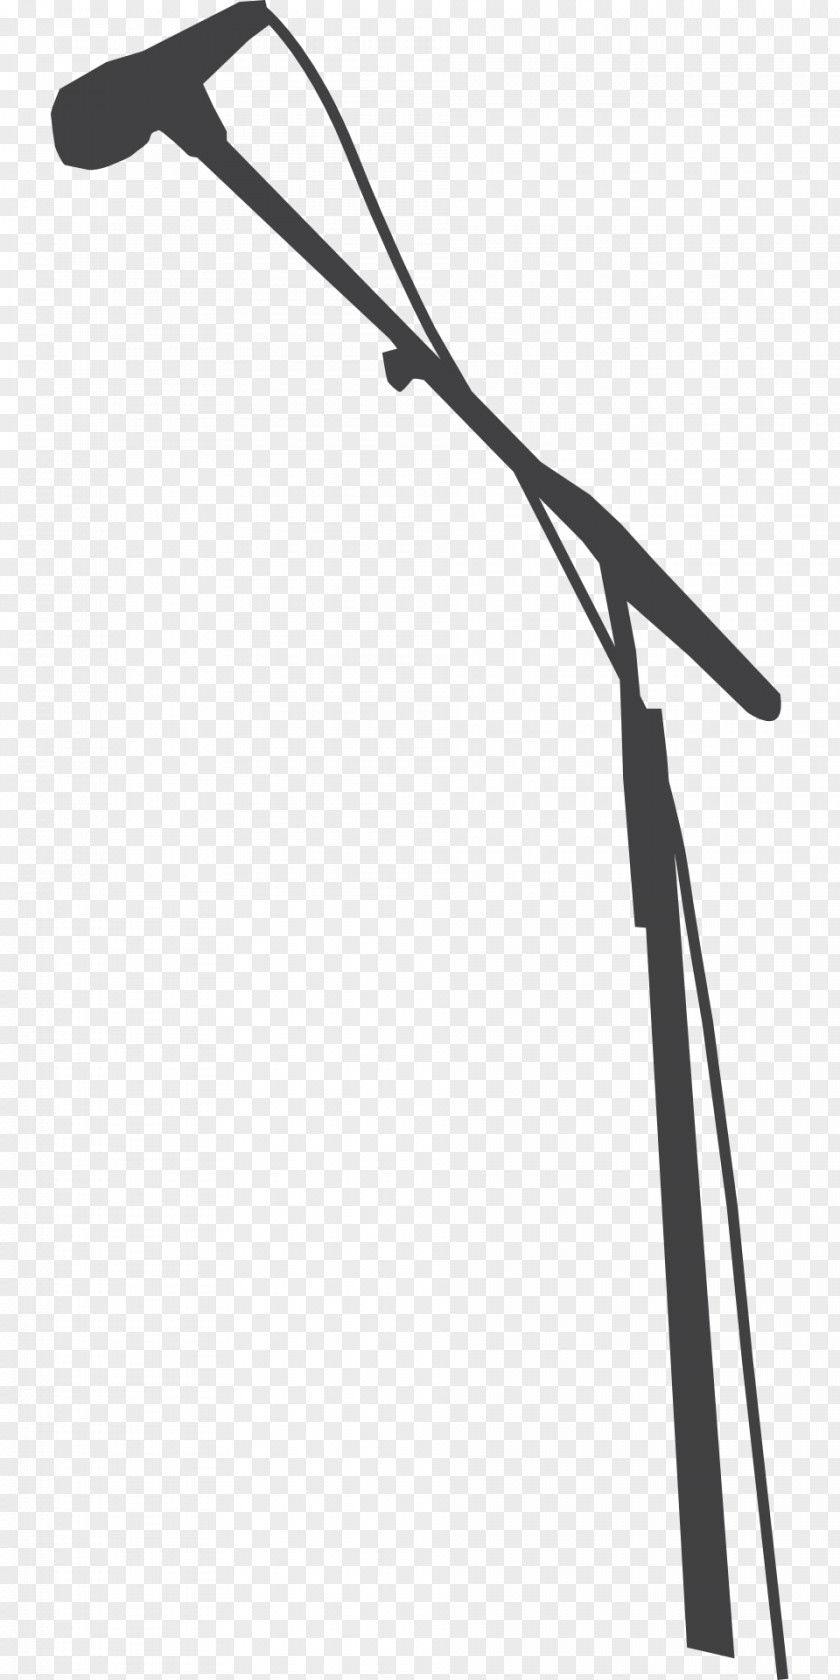 Mike Microphone Stands Silhouette Drawing PNG